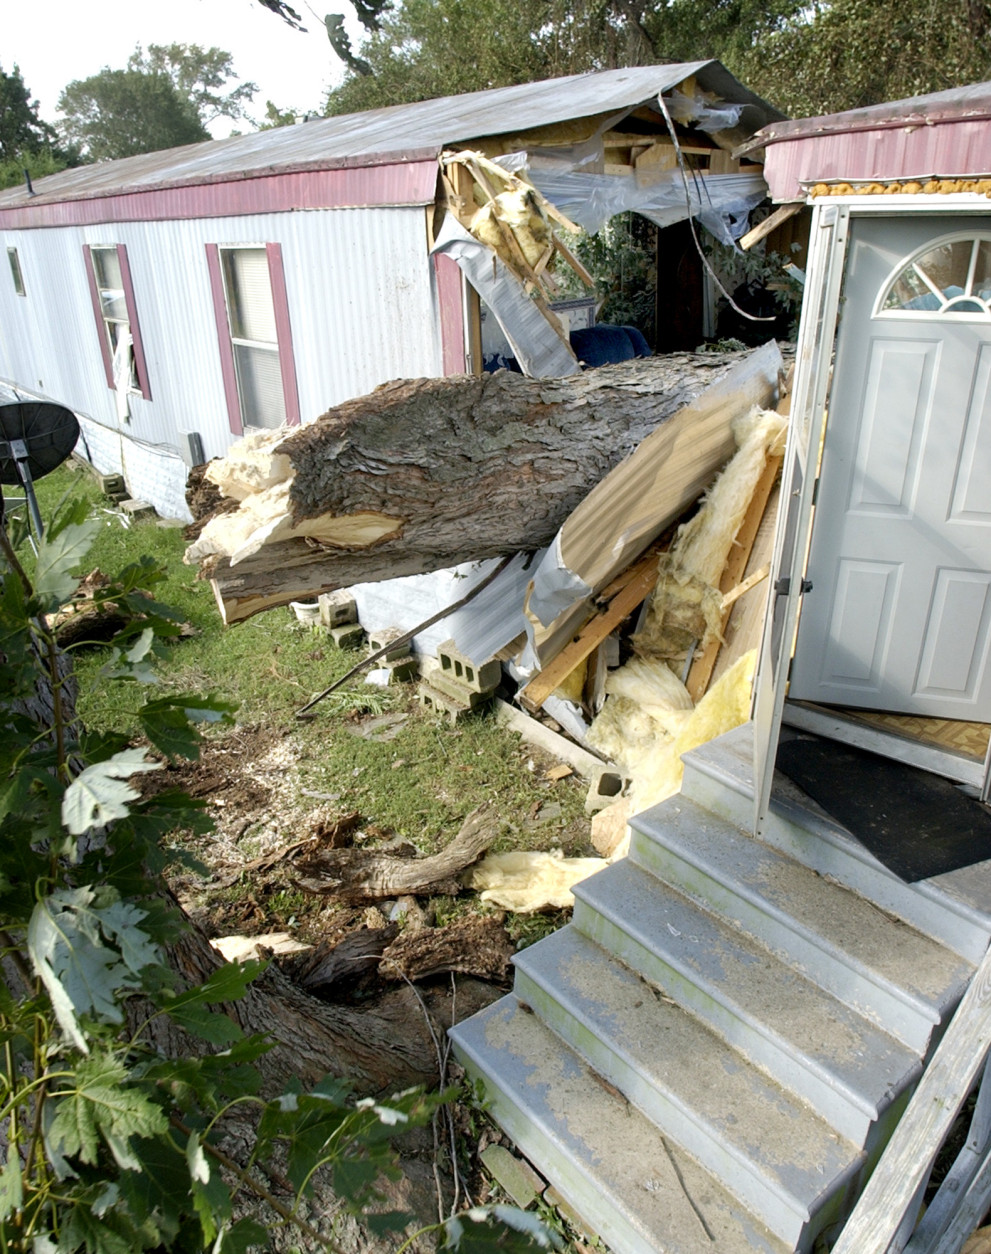 A tree, that fell through this trailer near Parksley, Va. killing one resident Thursday night during high winds from Hurricane Isabel, is seen on Friday Sept. 19, 2003.   (AP Photo/Scott Neville)